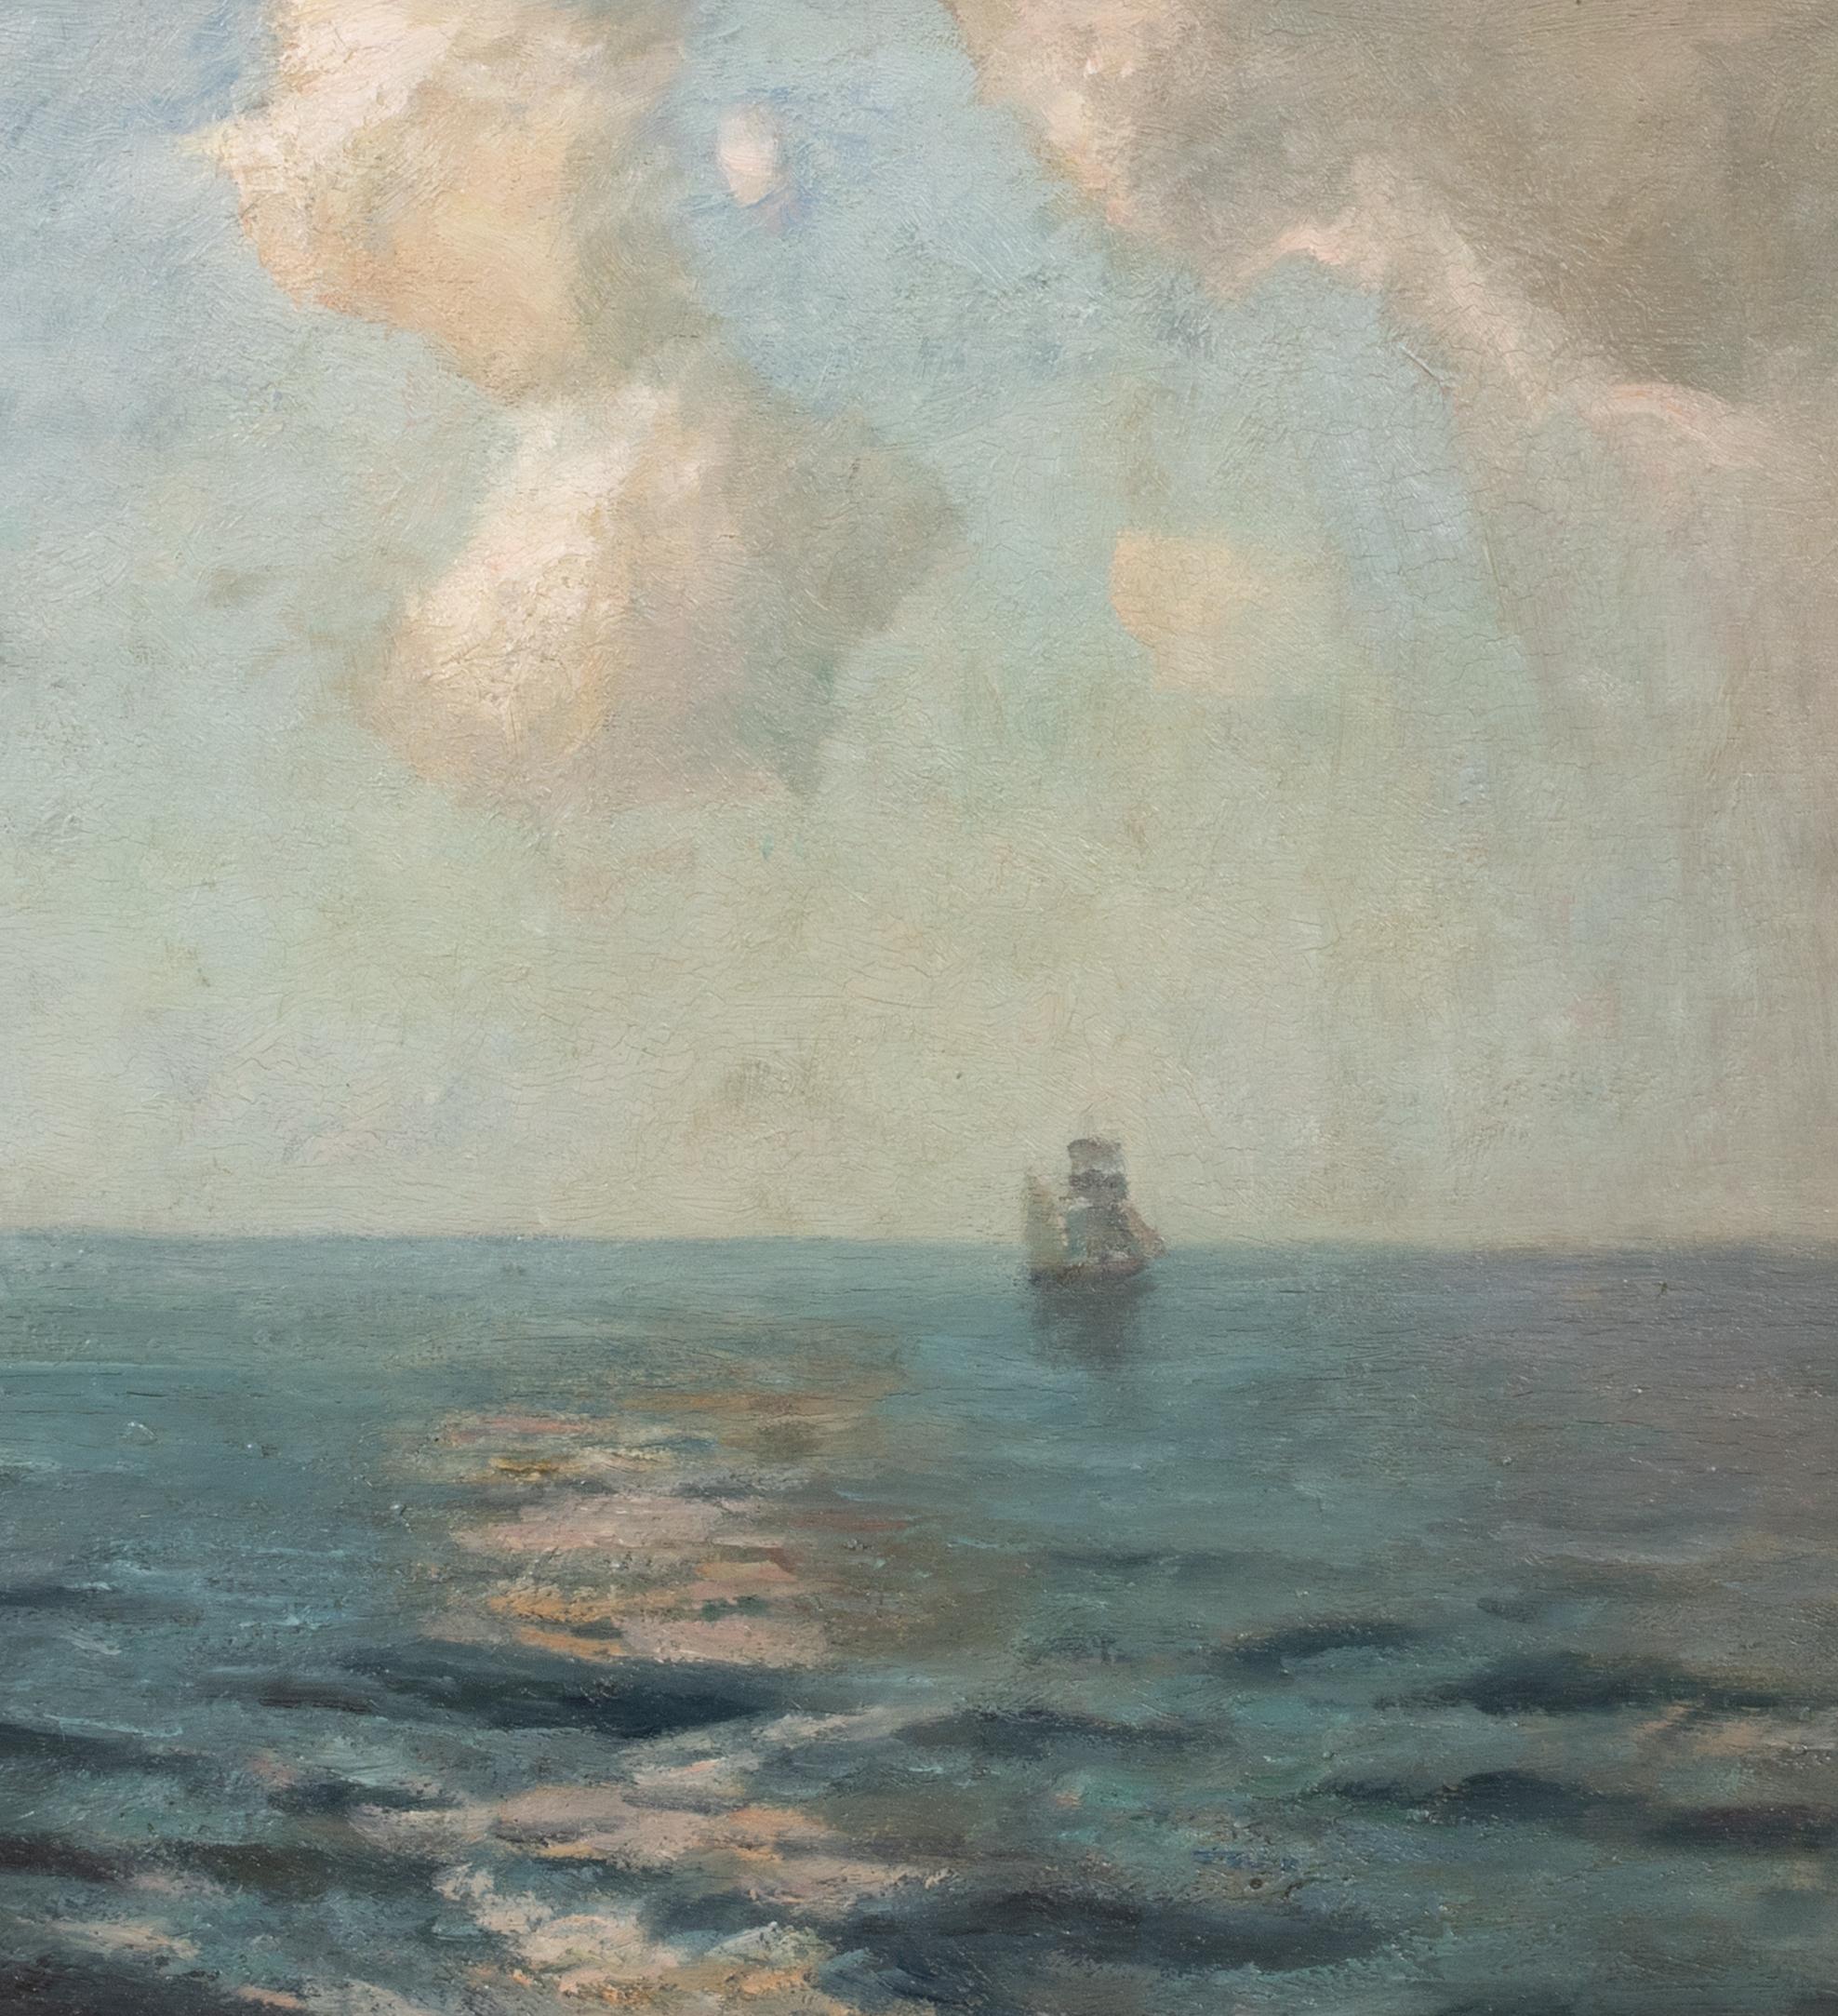 Clipper Off The Coast, St Ives, 19th Century 

by Albert Julius Olsson RBA ROI RWA RBC RA, British (1864–1942) to $45,000

Large 19th Century view of a solitary clipper off the coast of St Ives, oil on canvas by Julius Olsson. Excellent quality and